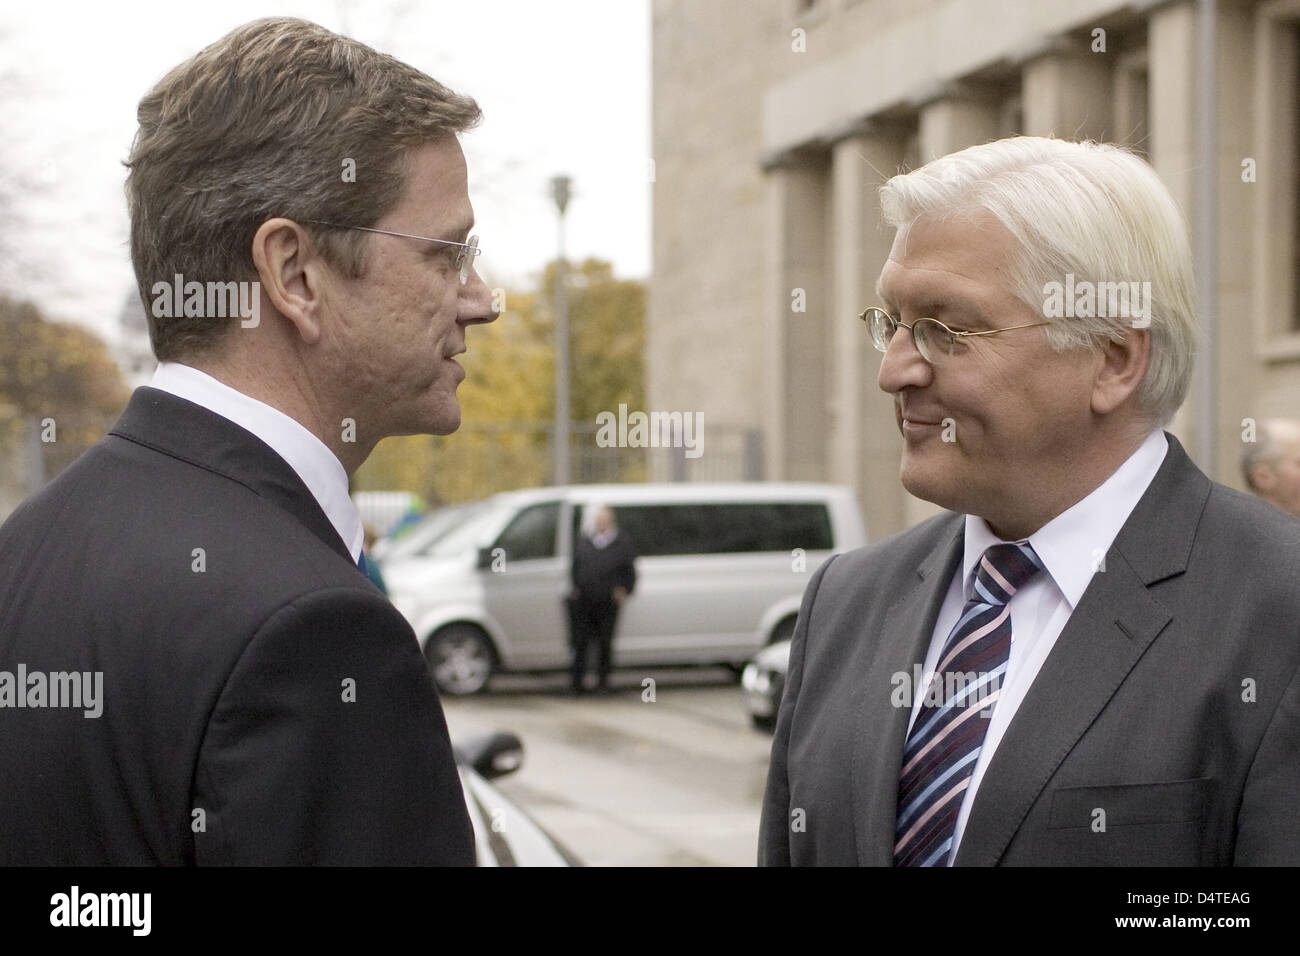 German Foreign Minister Guido Westerwelle (Liberal Democrats, L) says goodbye to former German Foreign Minister and Vice Chancellor Frank-Walter Steinmeier (Social Democrats) in front of the Ministry of Foreign Affairs in Berlin, Germany, 29 October 2009. Photo: ARNO BURGI Stock Photo